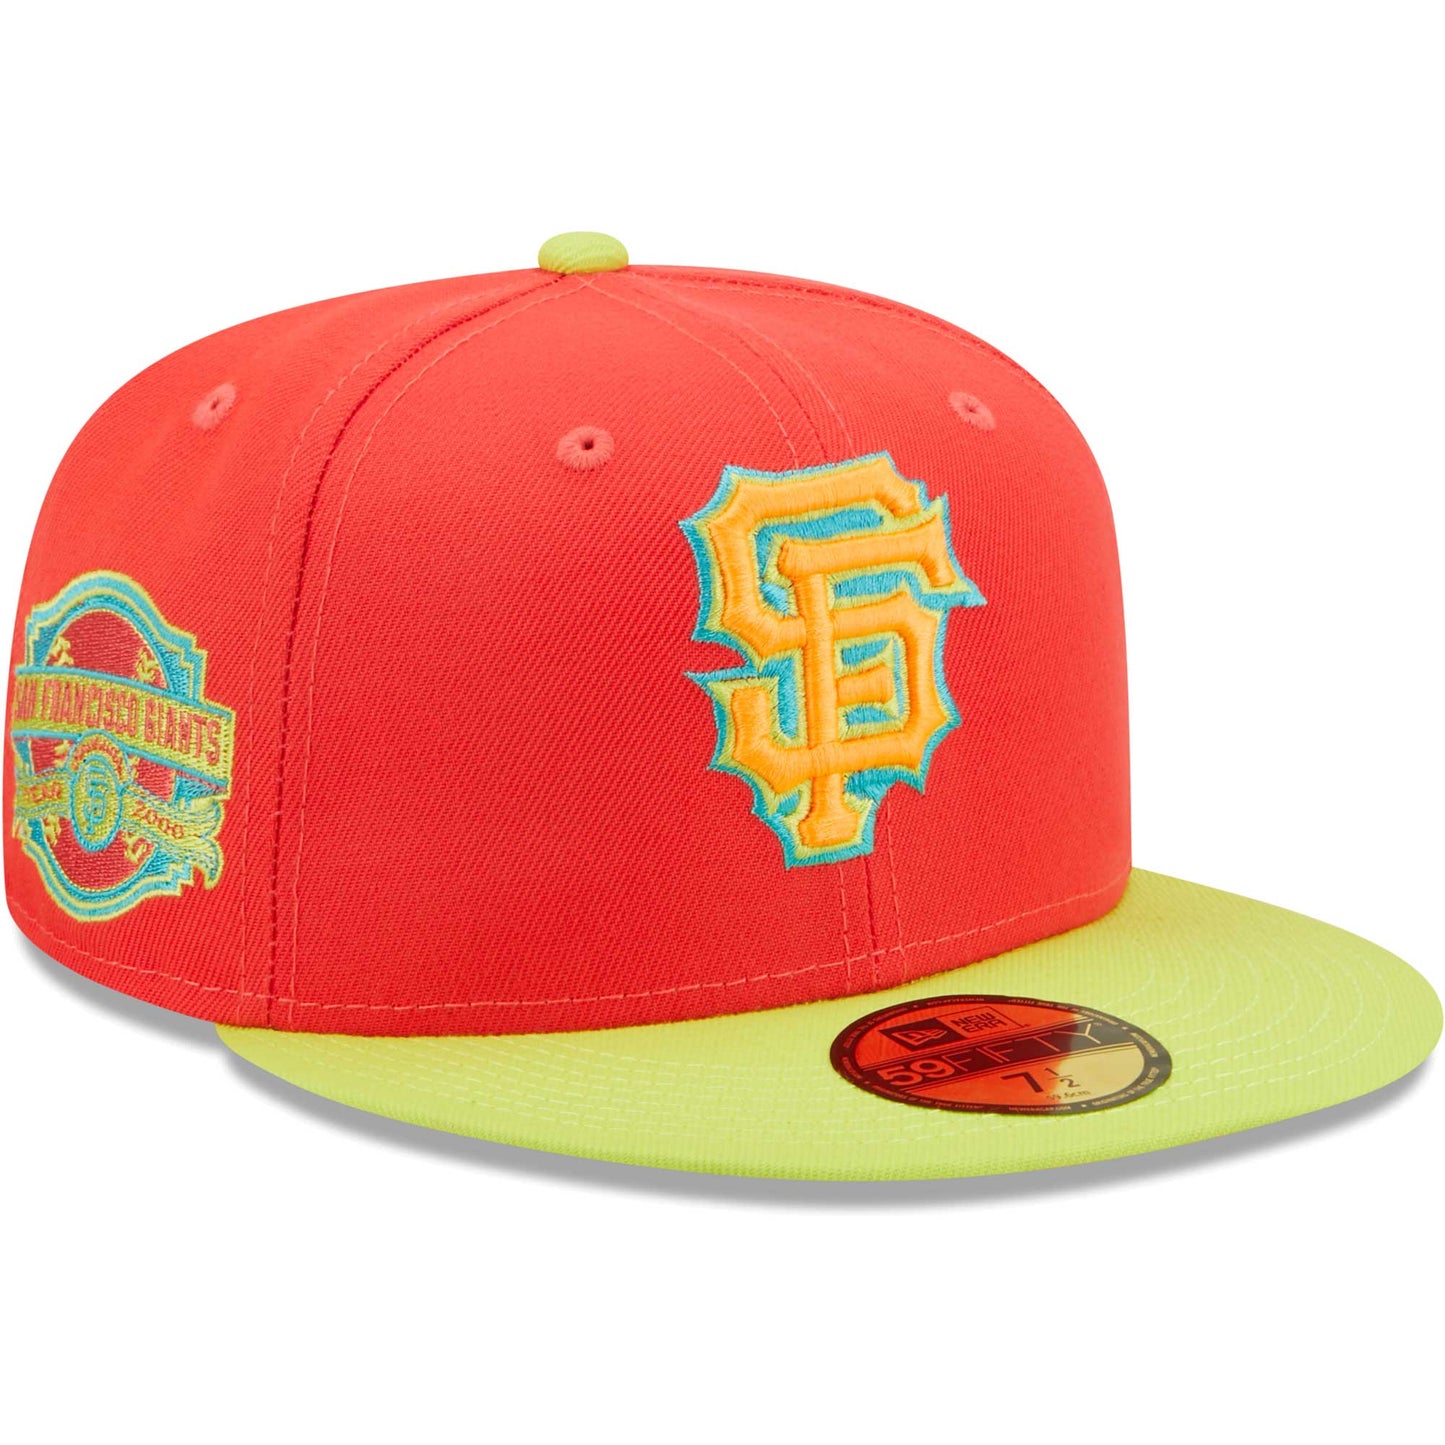 San Francisco Giants New Era Lava Highlighter Combo 59FIFTY Fitted Hat - Red/Neon Green